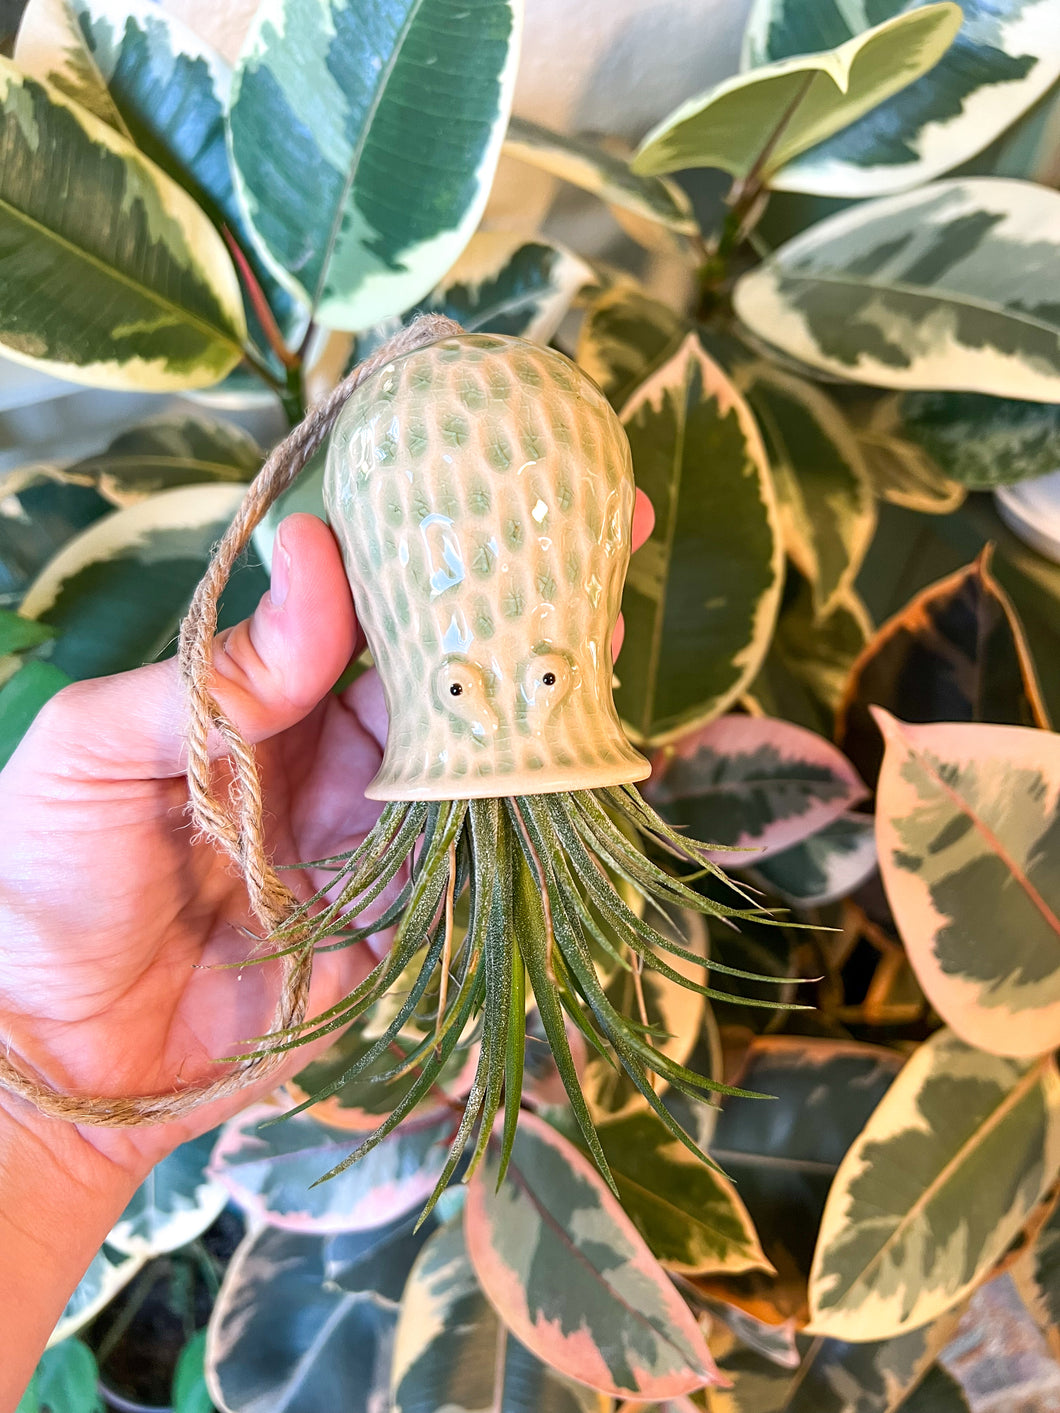 Ceramic octopus air plant holder (Air plant not included)